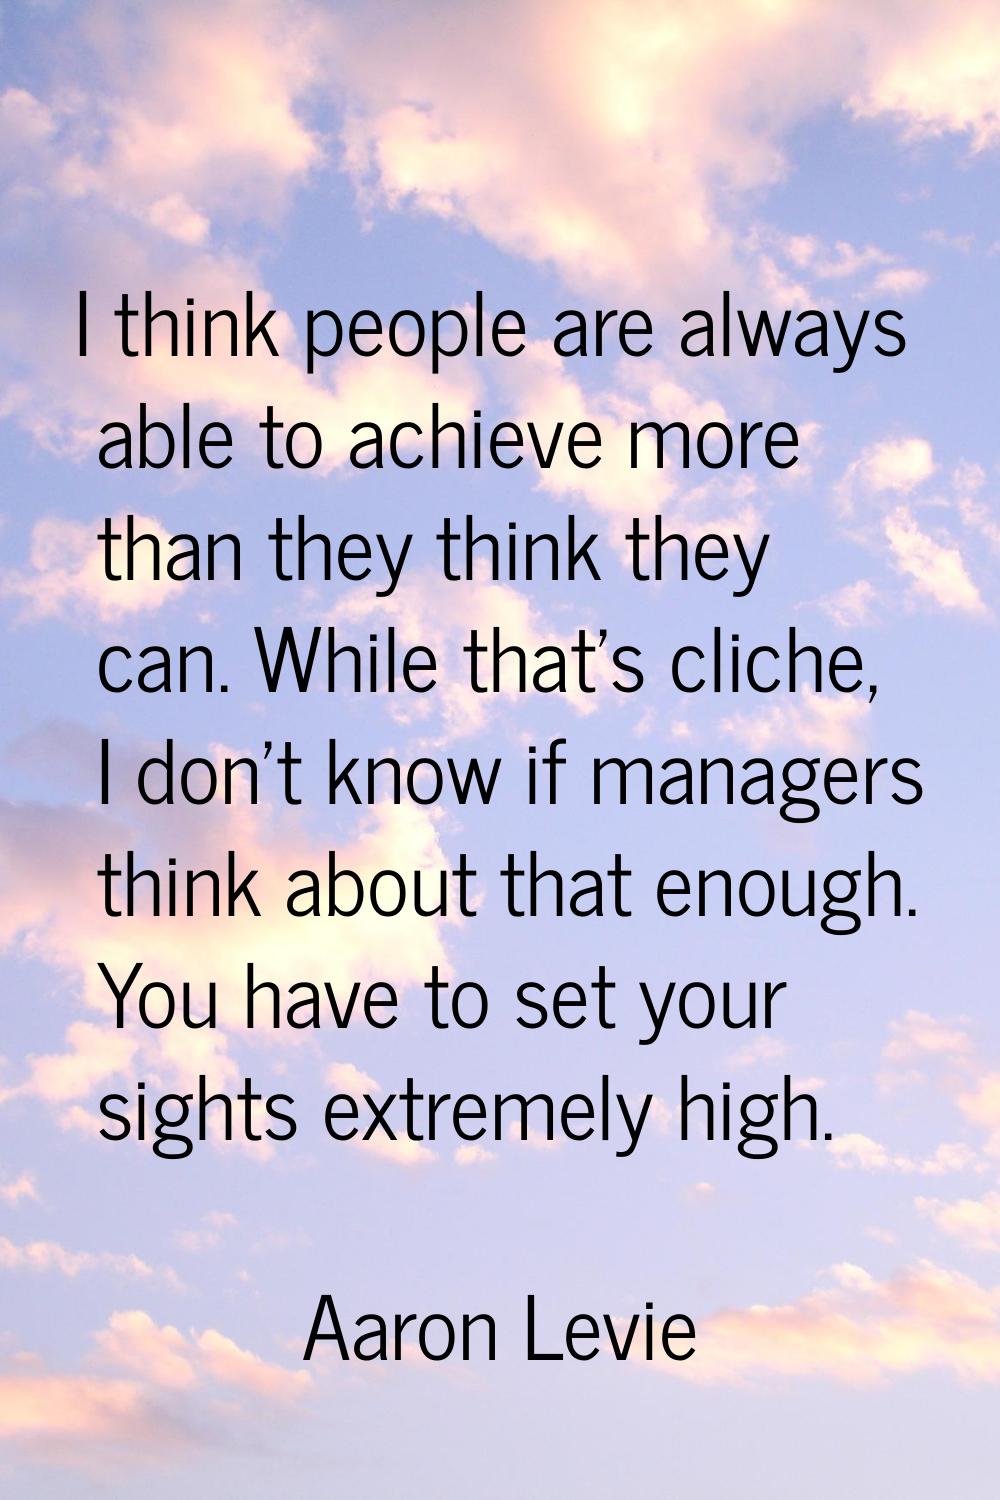 I think people are always able to achieve more than they think they can. While that's cliche, I don